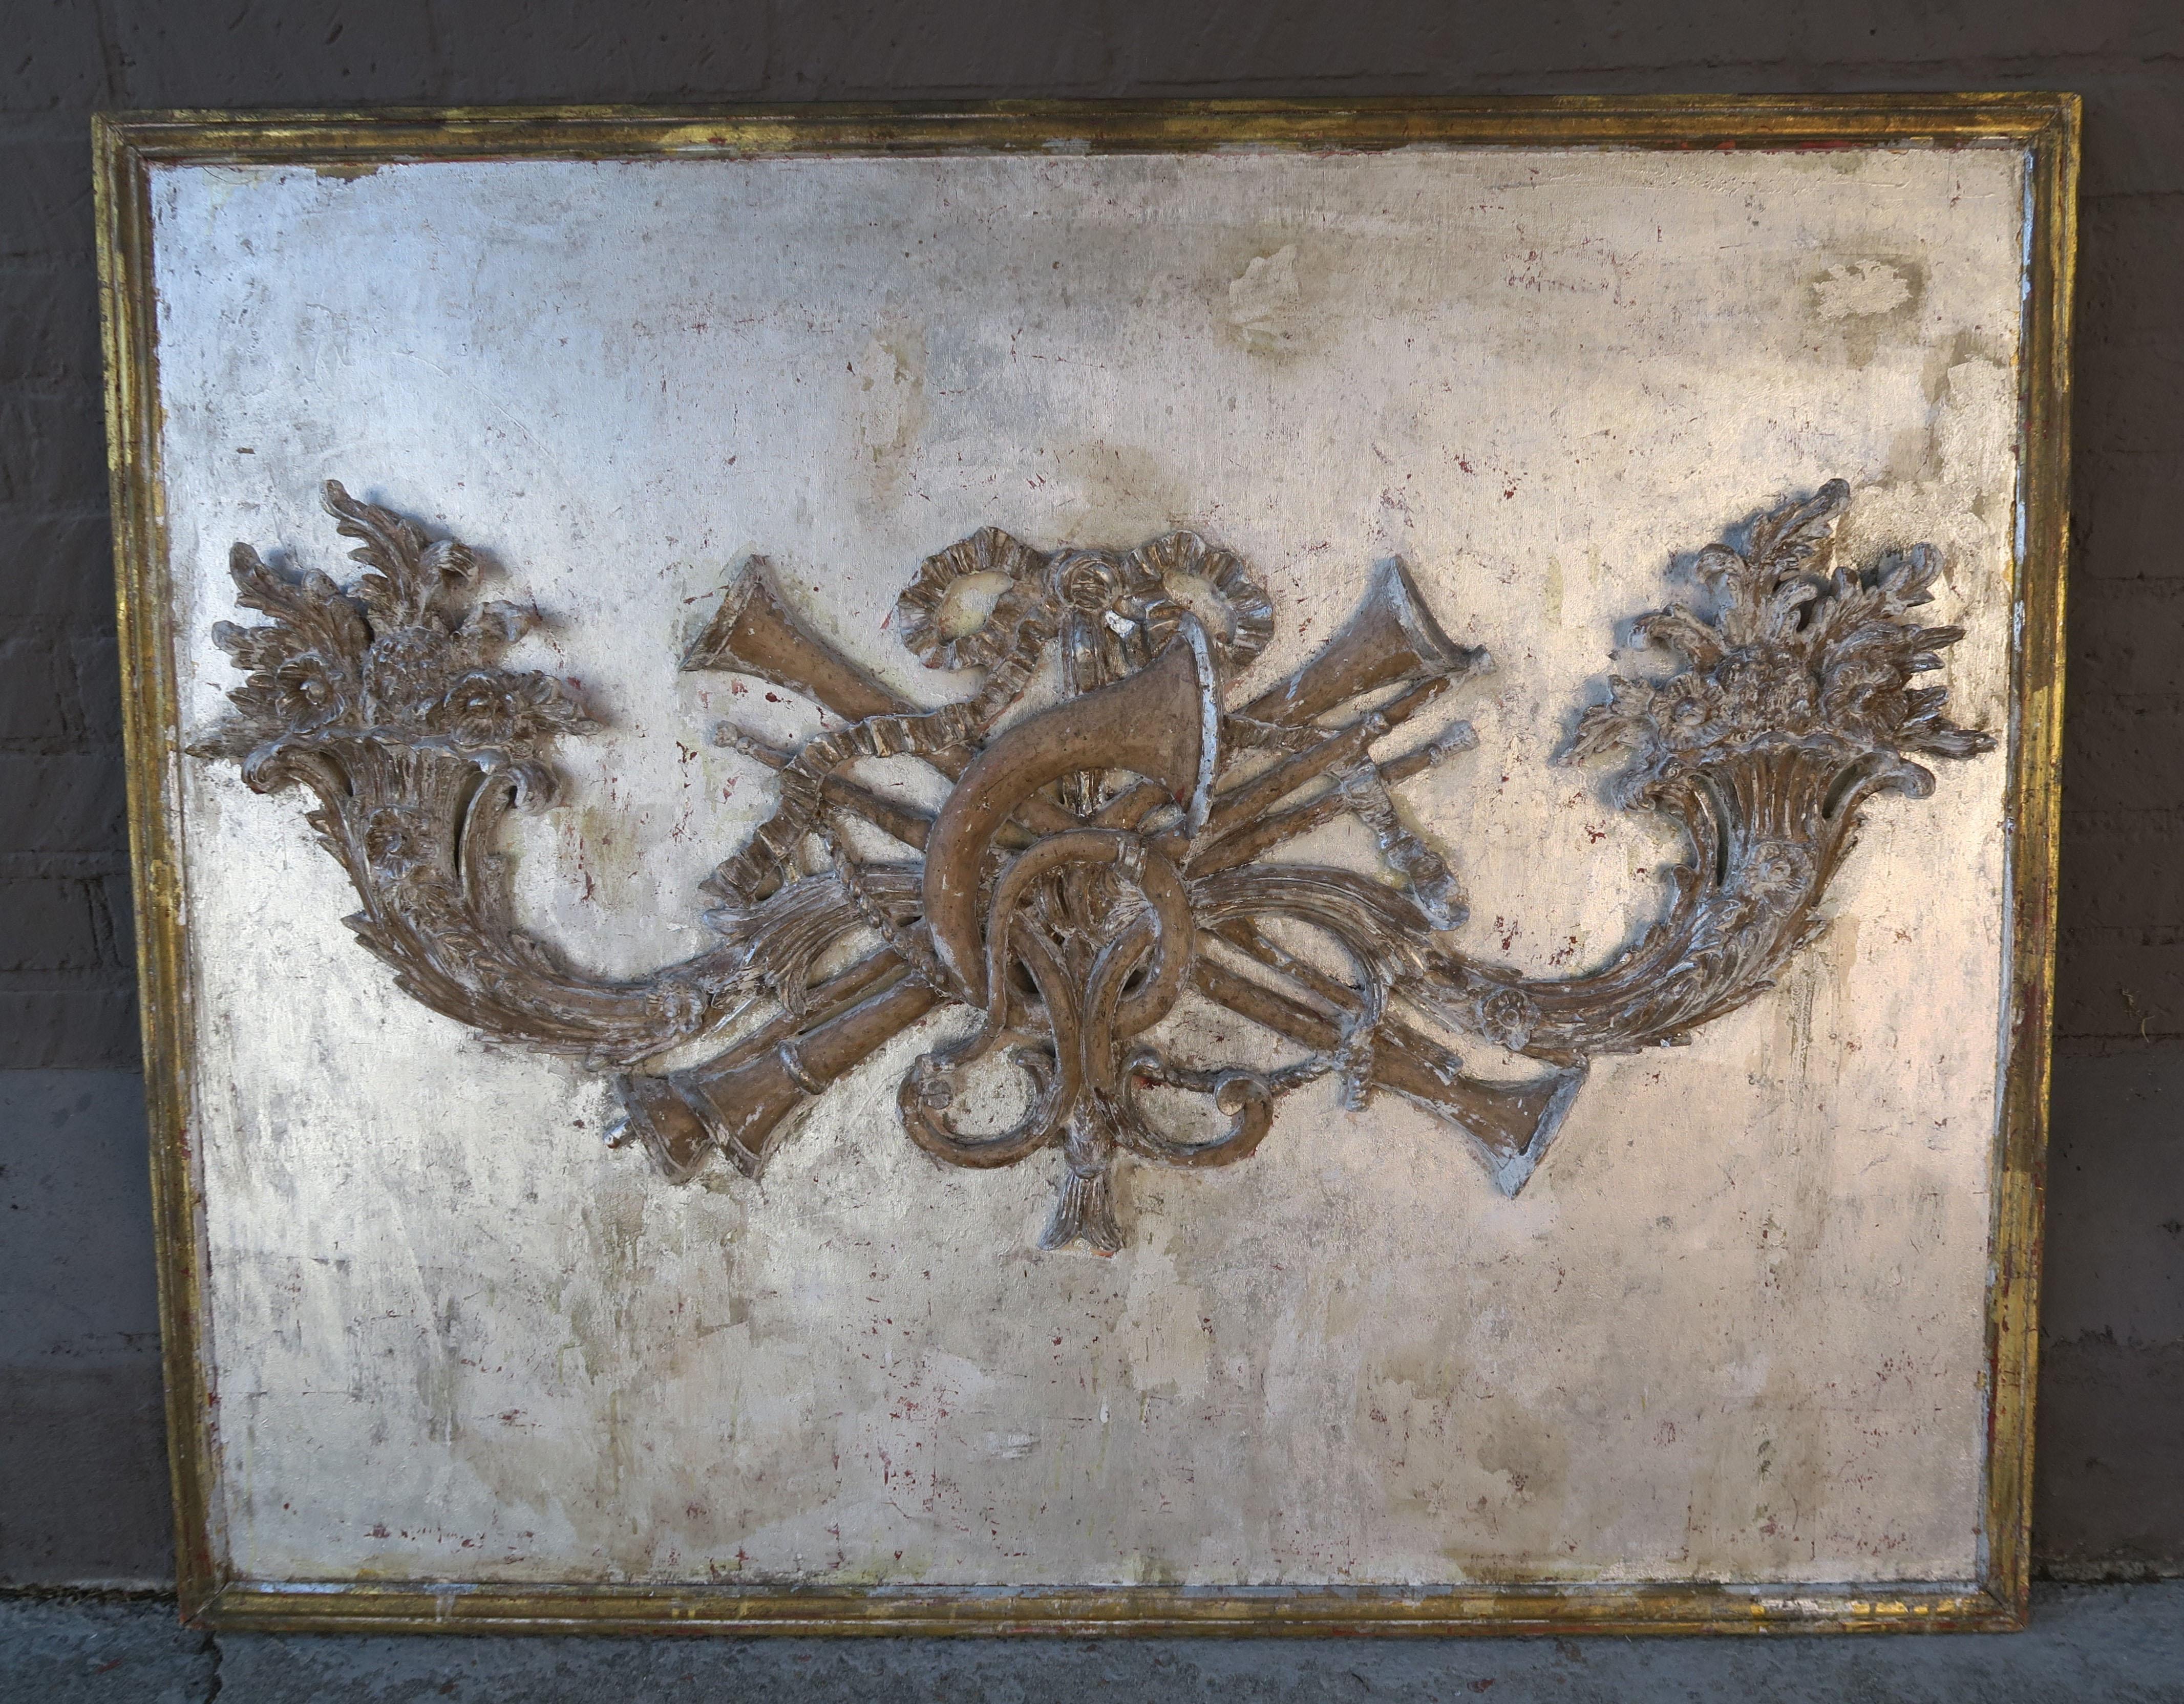 French silvered carved wood double cornucopia panel framed in a gold leaf finish. The panel is beautifully detailed with musical instruments, ribbon, flowers, and so much more. It could be made into a magnificent headboard or be hung on a wall as